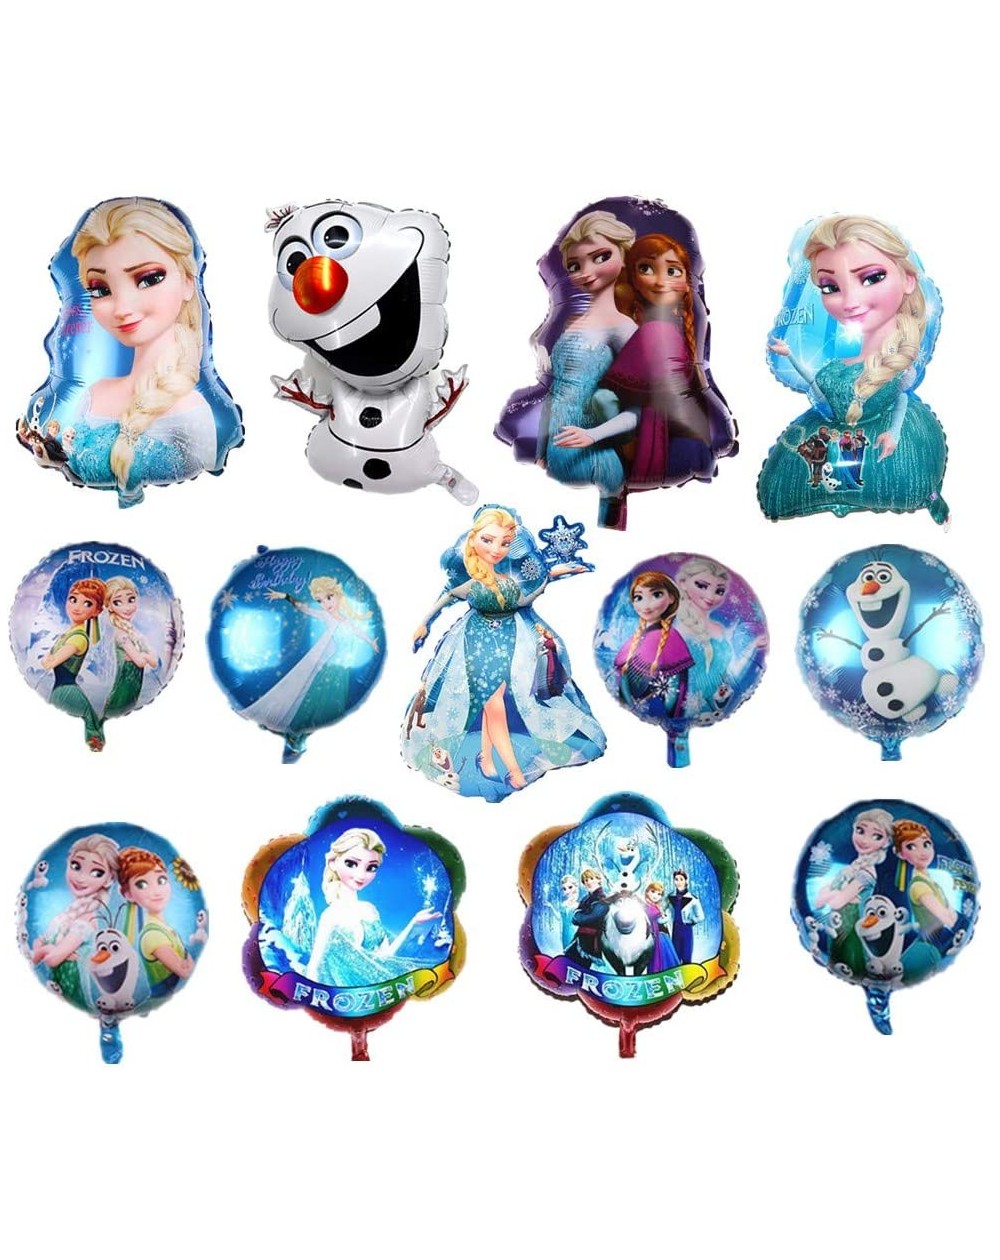 Balloons 13 pack Frozen Party Balloon- Frozen Party Balloon Decorations For Children's Party Supplies - CU199DSTCWT $15.34